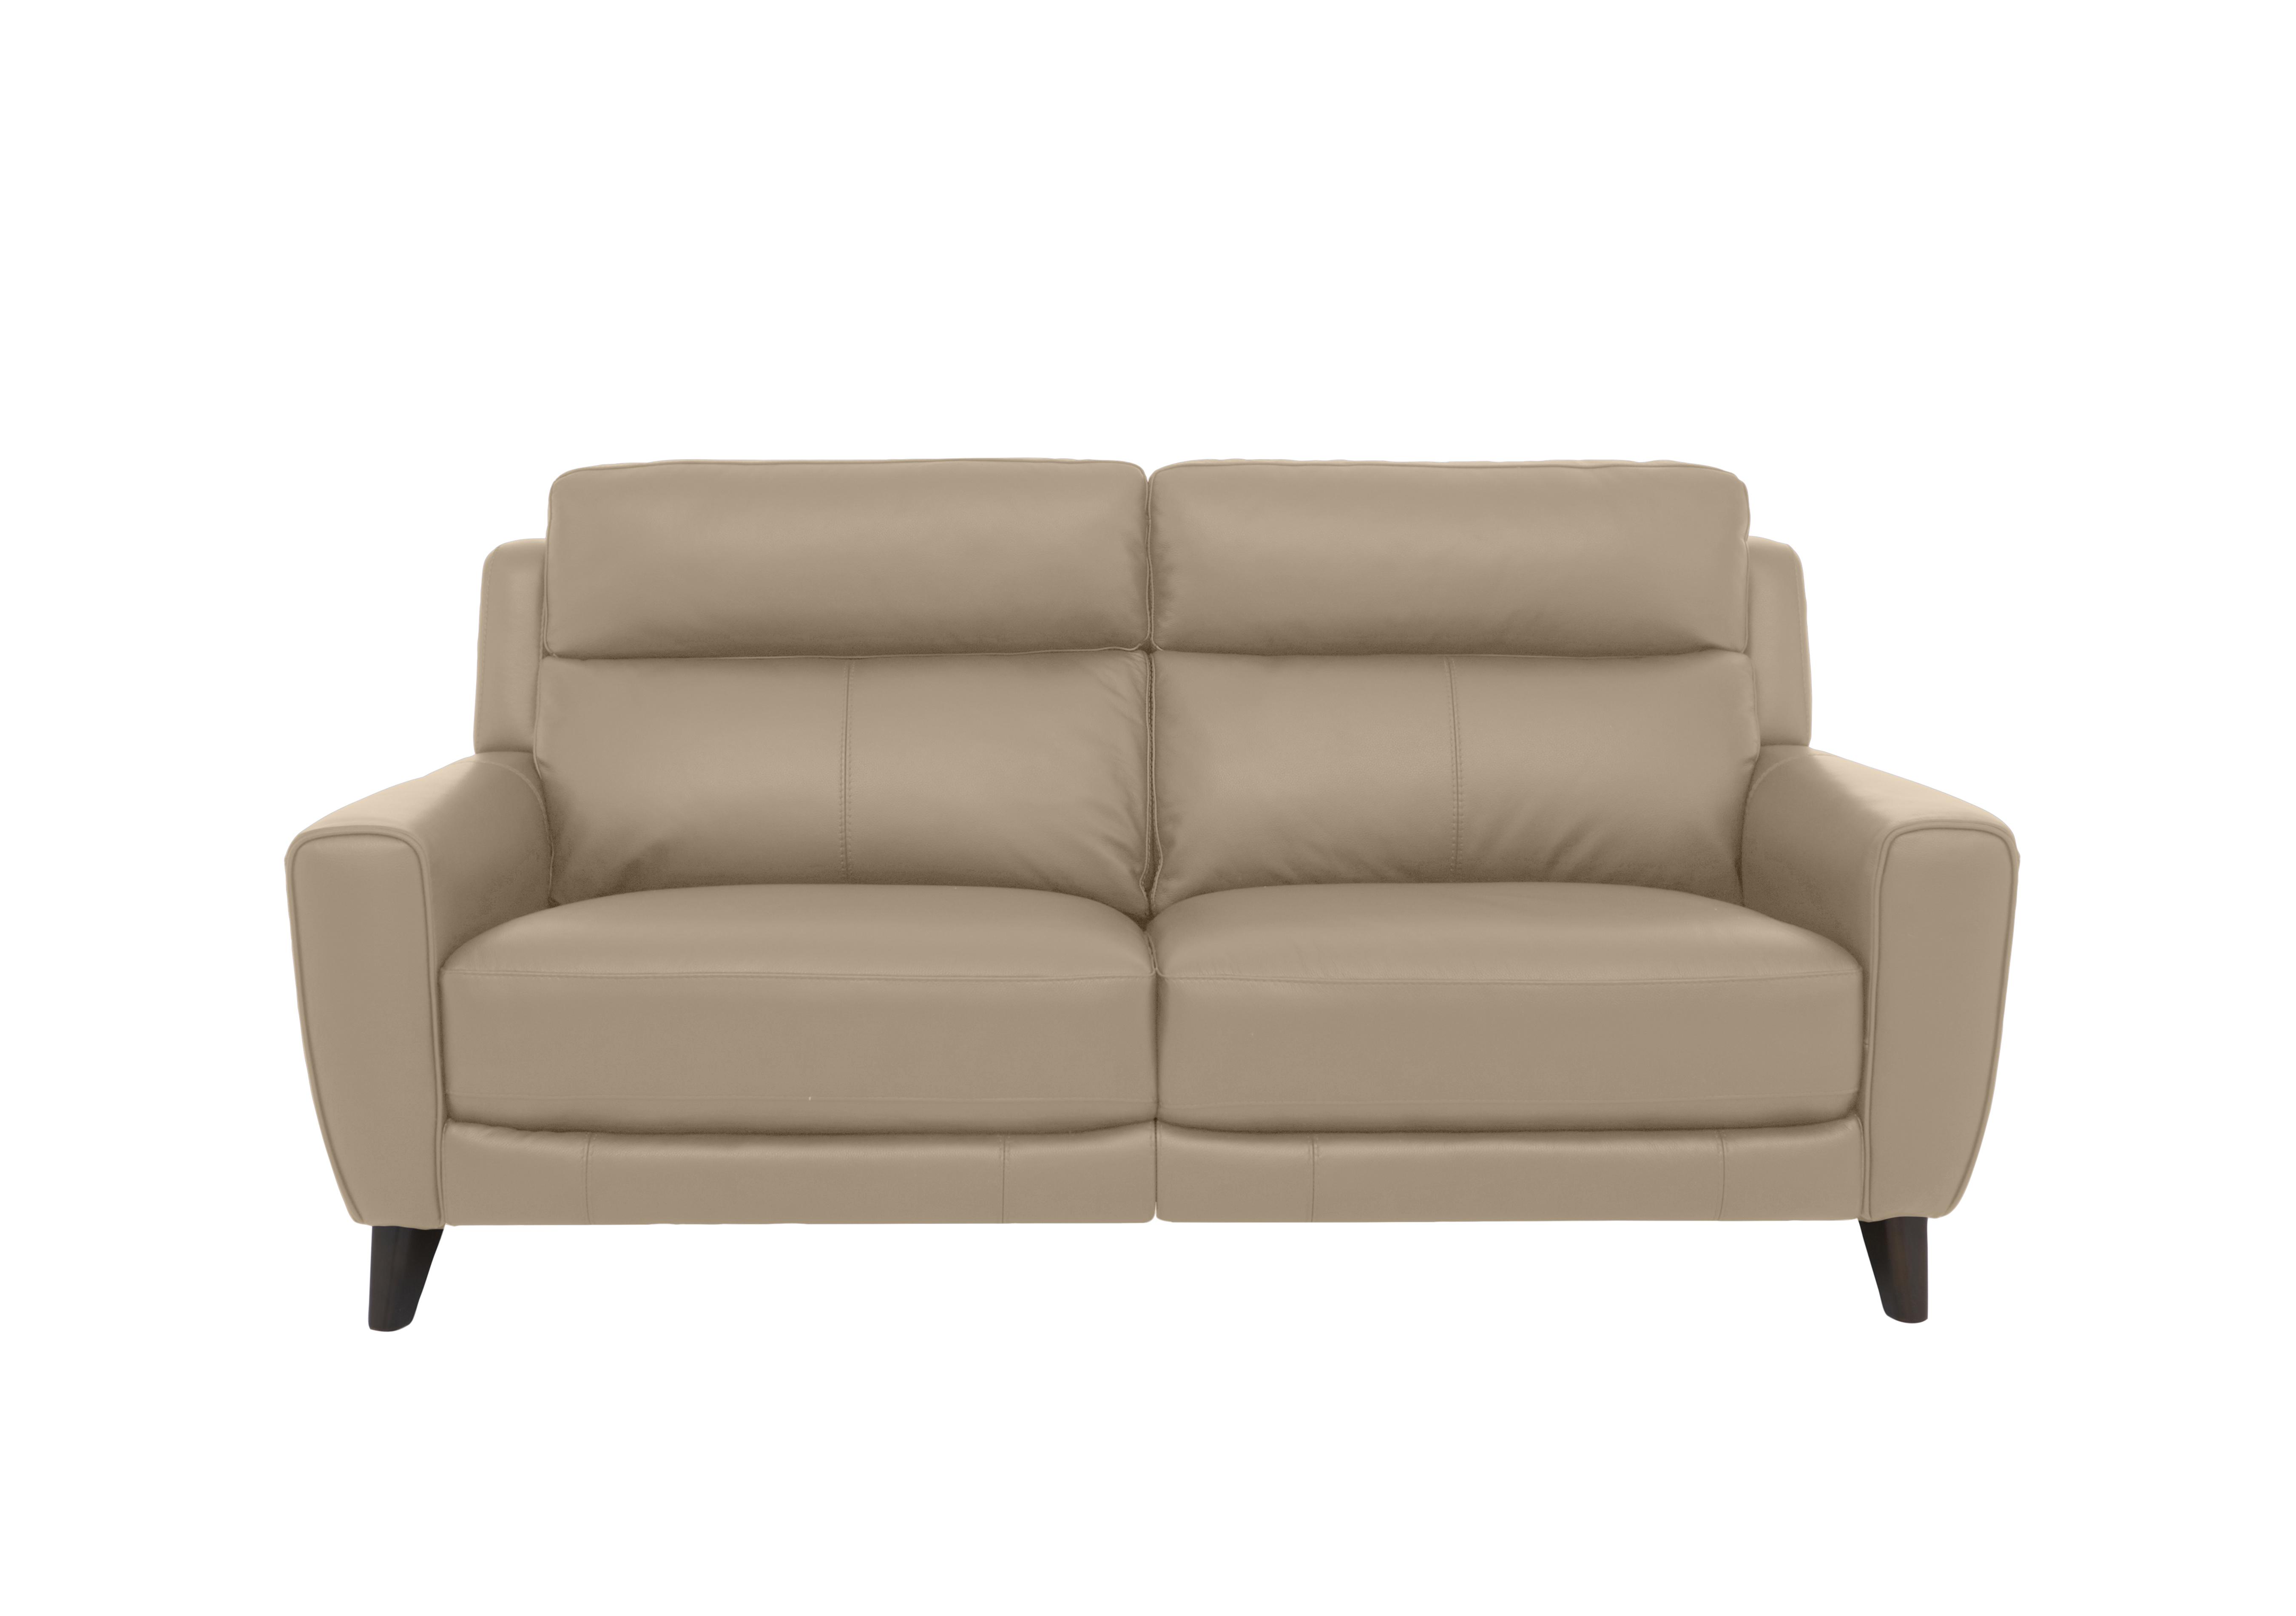 Zen 3 Seater Leather Power Recliner Sofa with Power Headrests in Bx-039c Pebble on Furniture Village